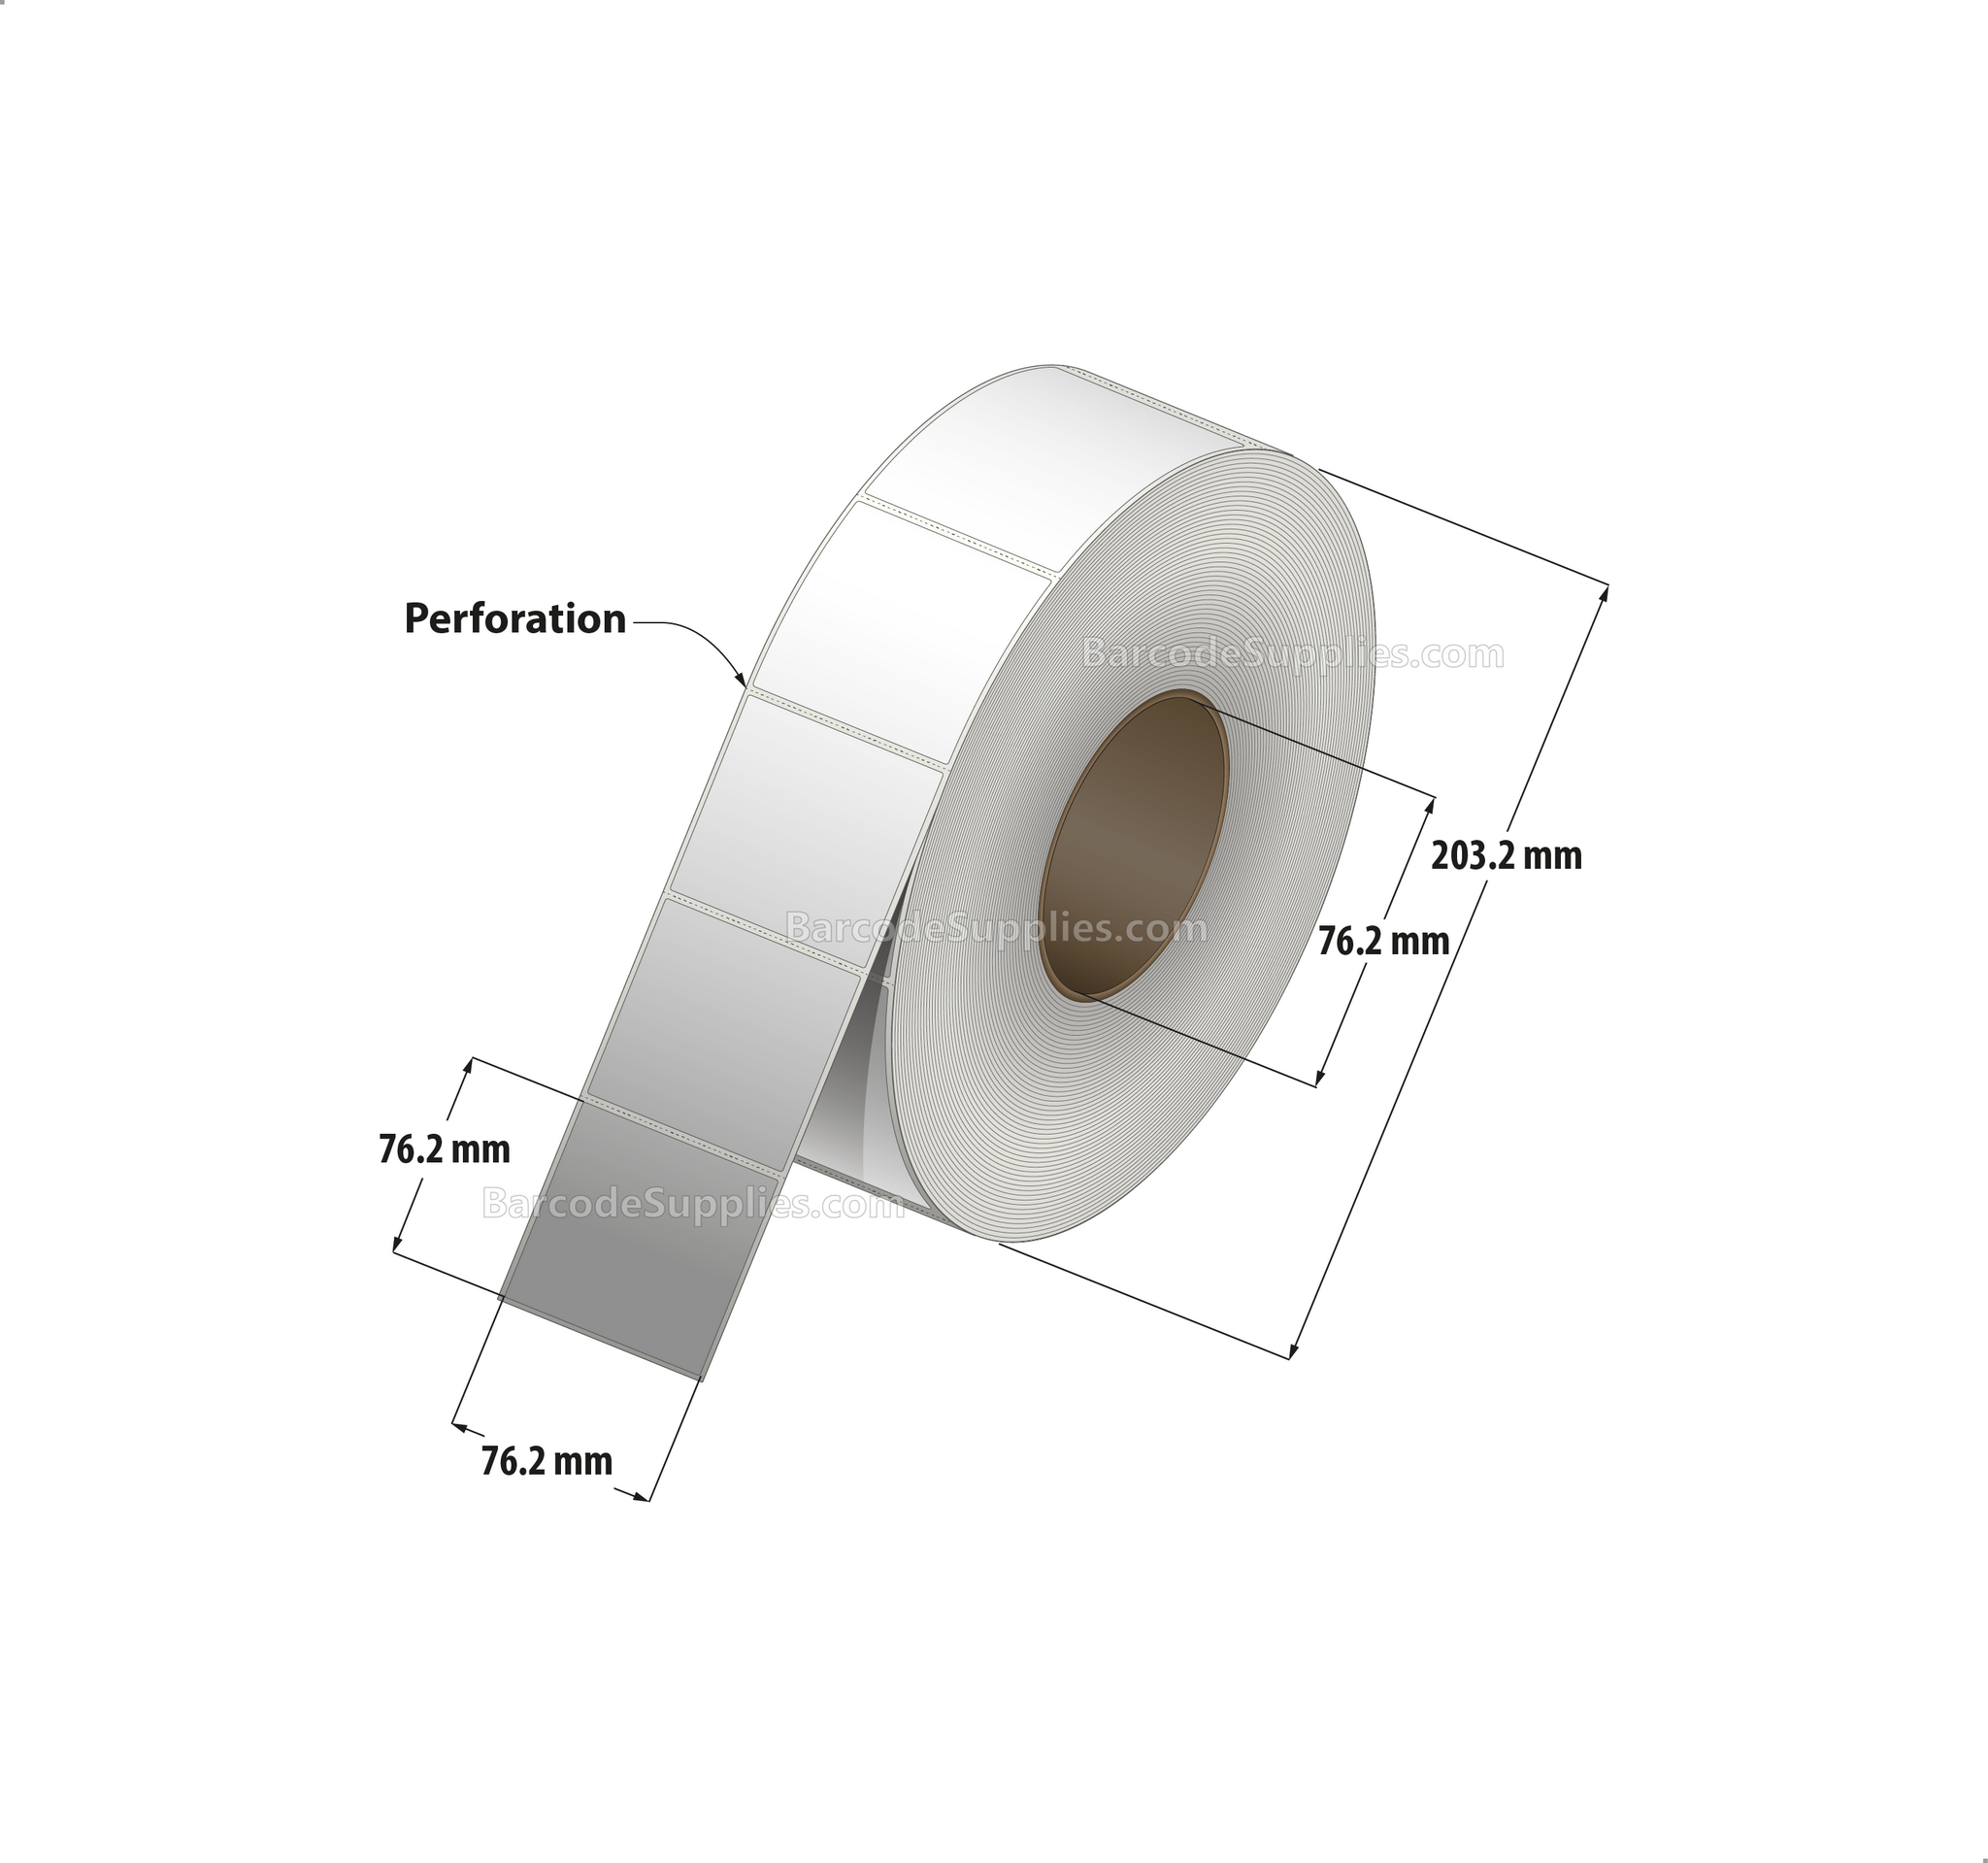 3 x 3 Thermal Transfer White Labels With Rubber Adhesive - Perforated - 2000 Labels Per Roll - Carton Of 6 Rolls - 12000 Labels Total - MPN: CTT300300-3P